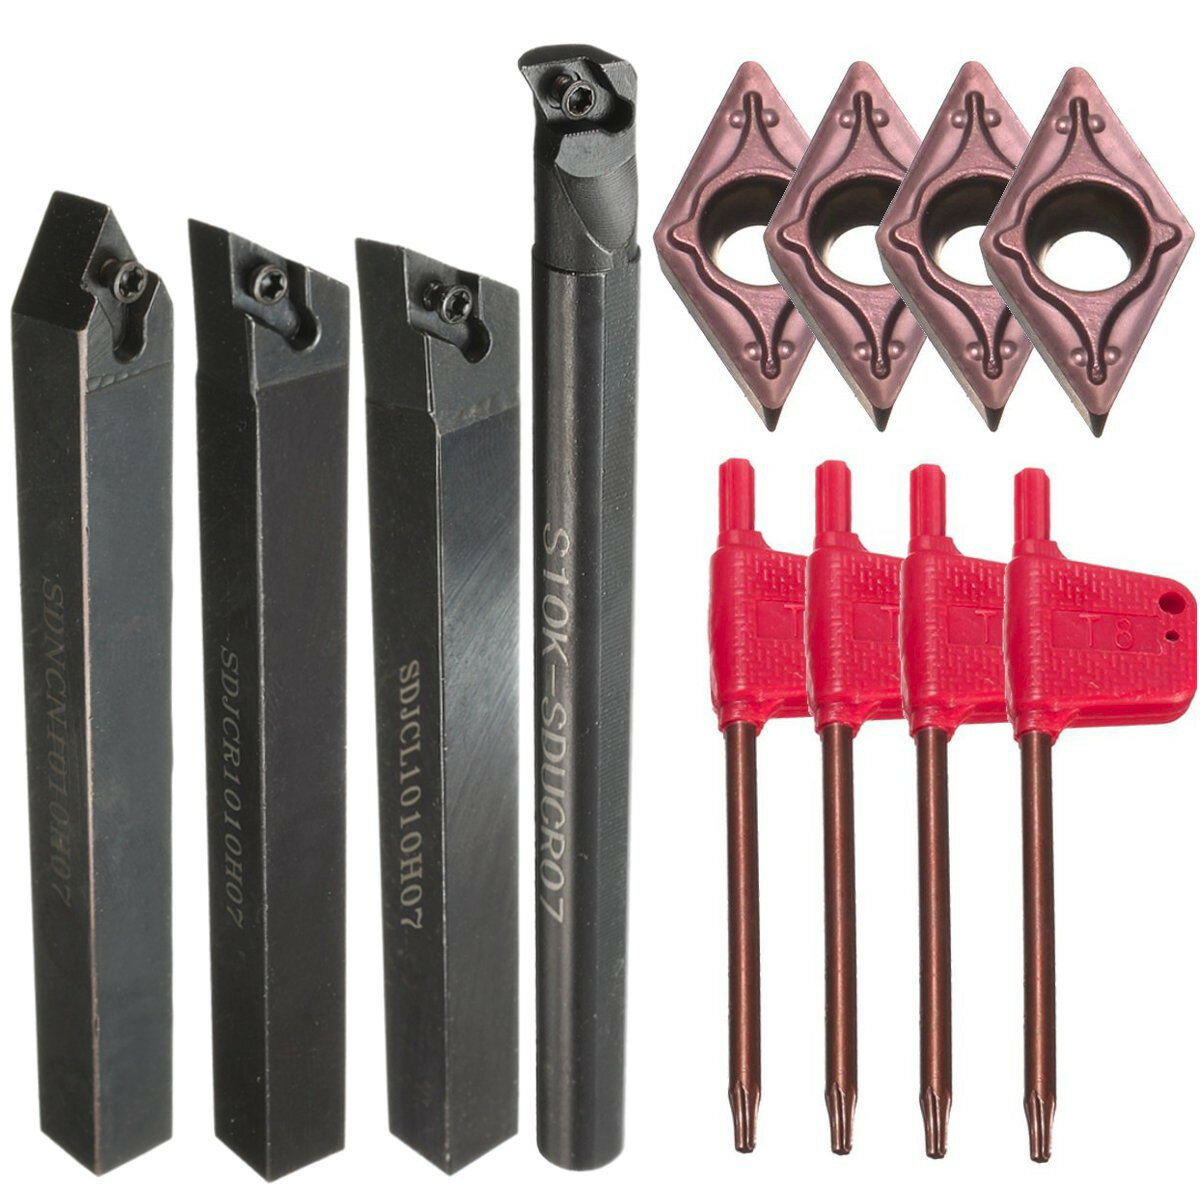 4pcs S10K-SDUCR07/SDJCR/SDJCL/SDNCN1010H07 Turning Tool Holder Set with 4pcs DCMT0702 Inserts